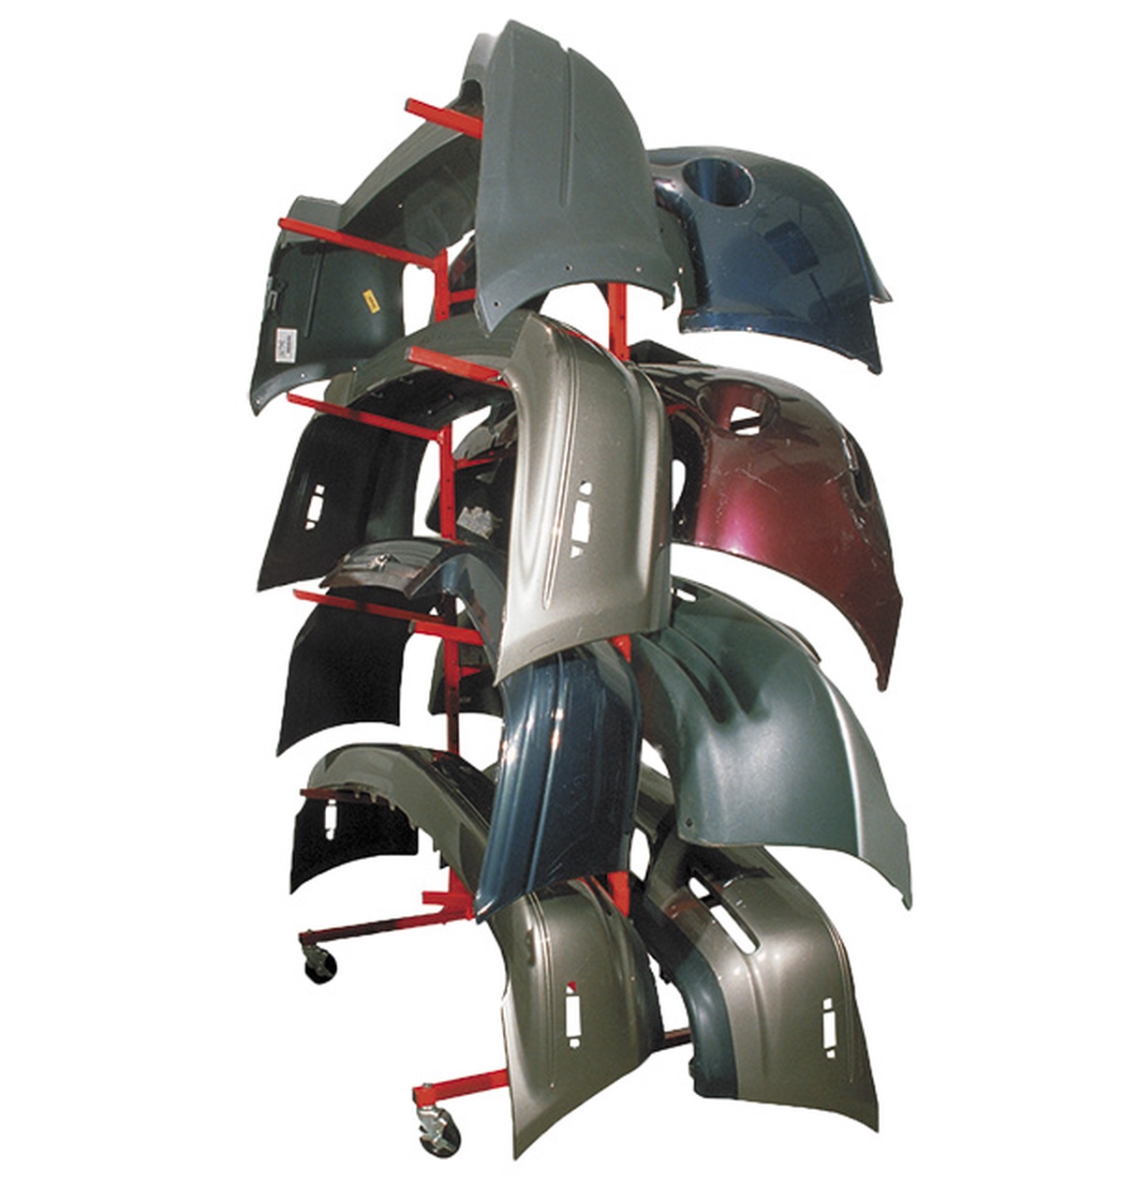 Picture of Innovative Tools & Technology MBM Mobile Bumper Cover Storage Rack